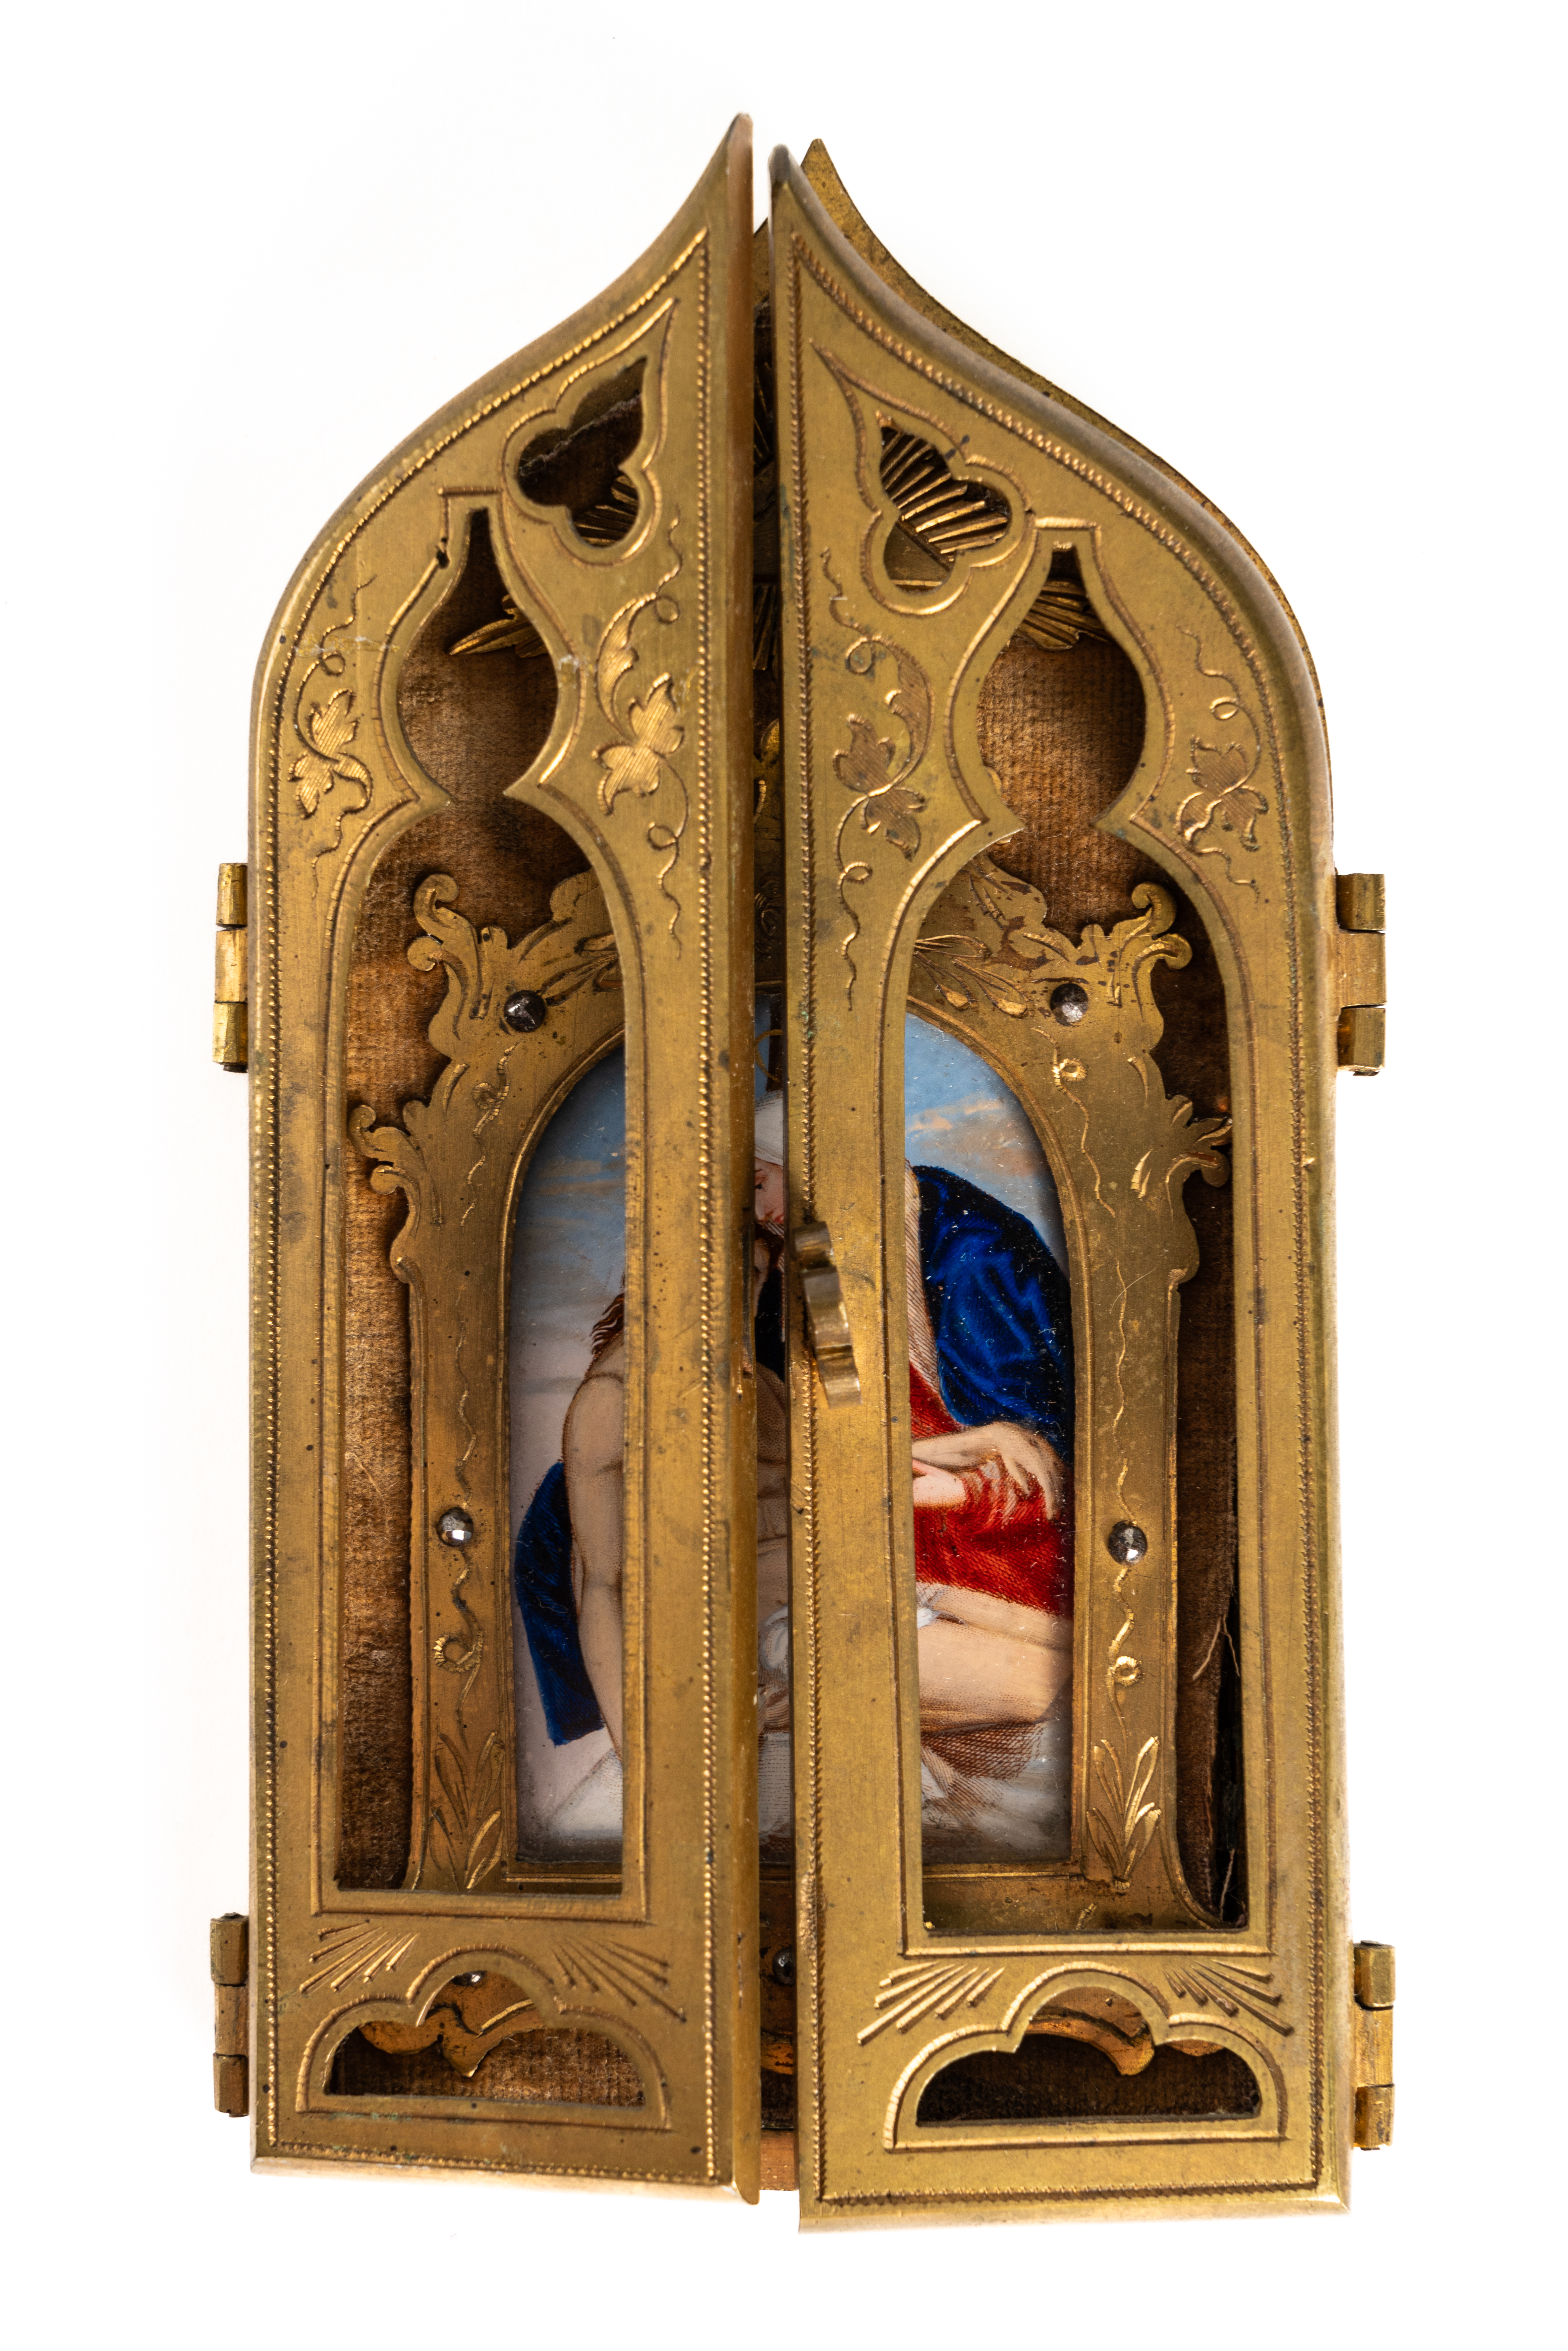 A EUROPEAN ENAMEL AND GILT-BRASS TRIPTYCH DEPICTING THE PIETA AND A RUSSIAN ENAMEL ICON (3) - Image 3 of 6